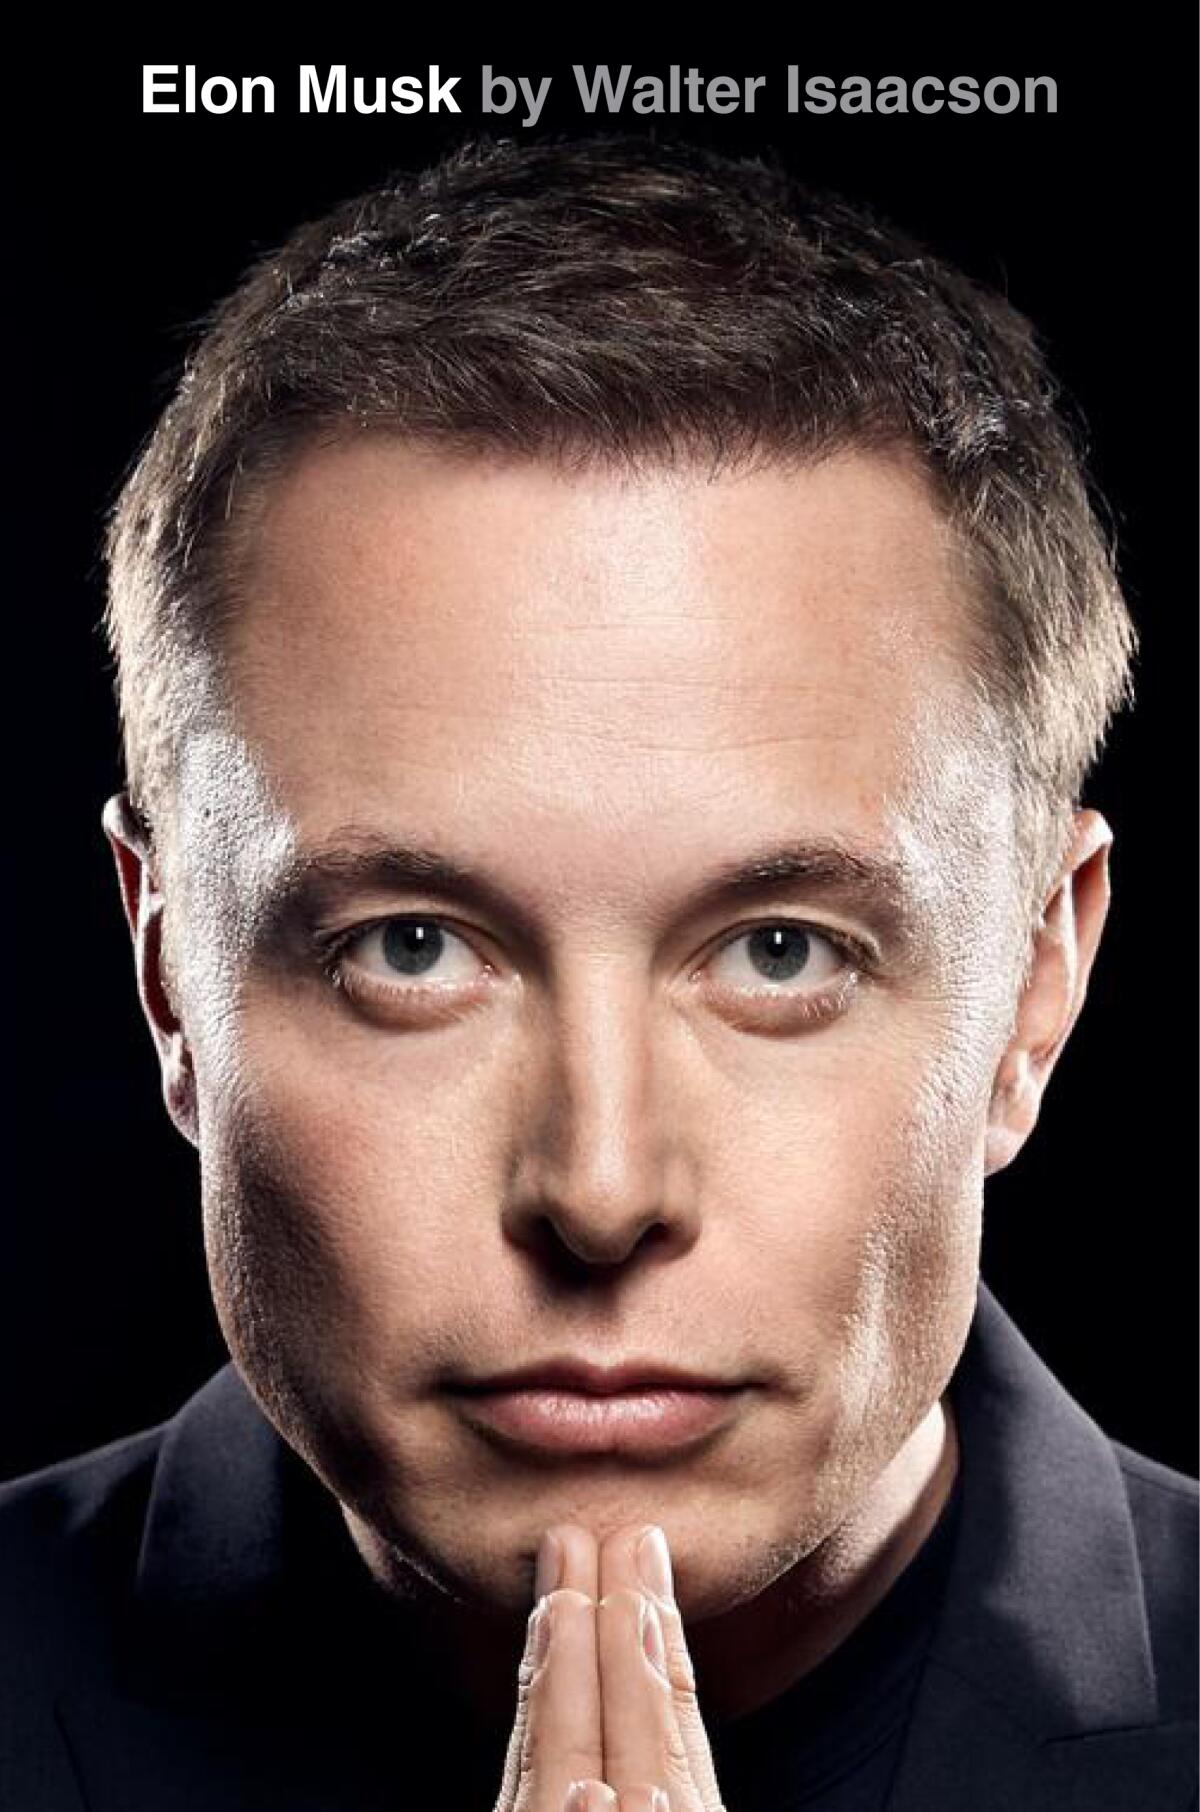 Elon Musk with praying hands on the cover of Walter Isaacson's biography about him